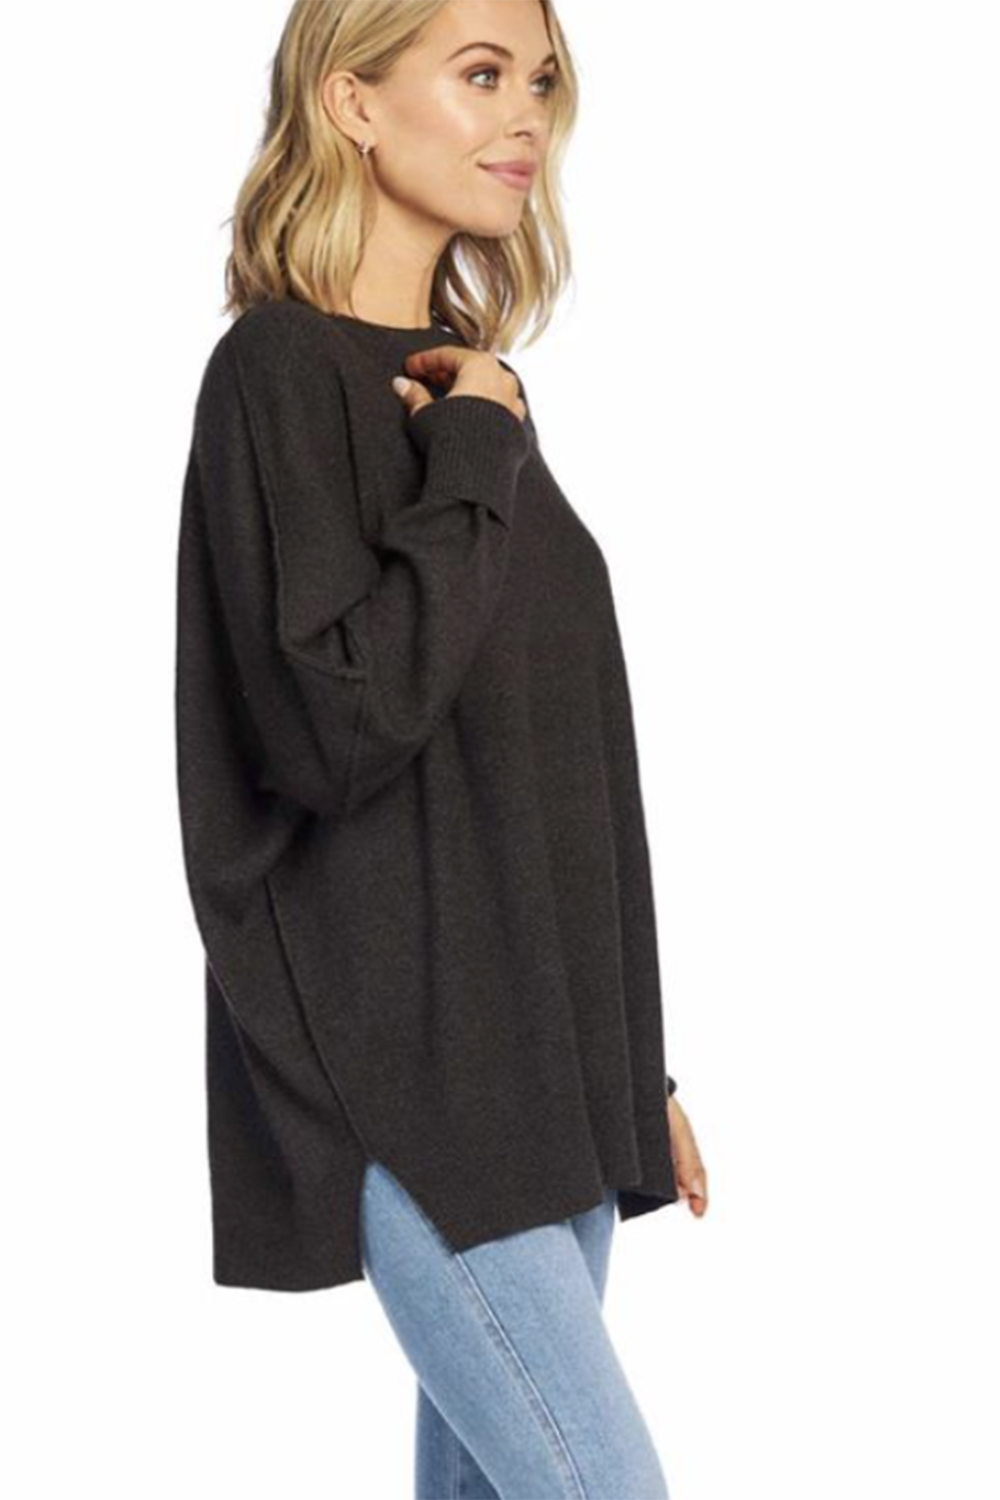 Astrid Ribbed Sweater - Charcoal